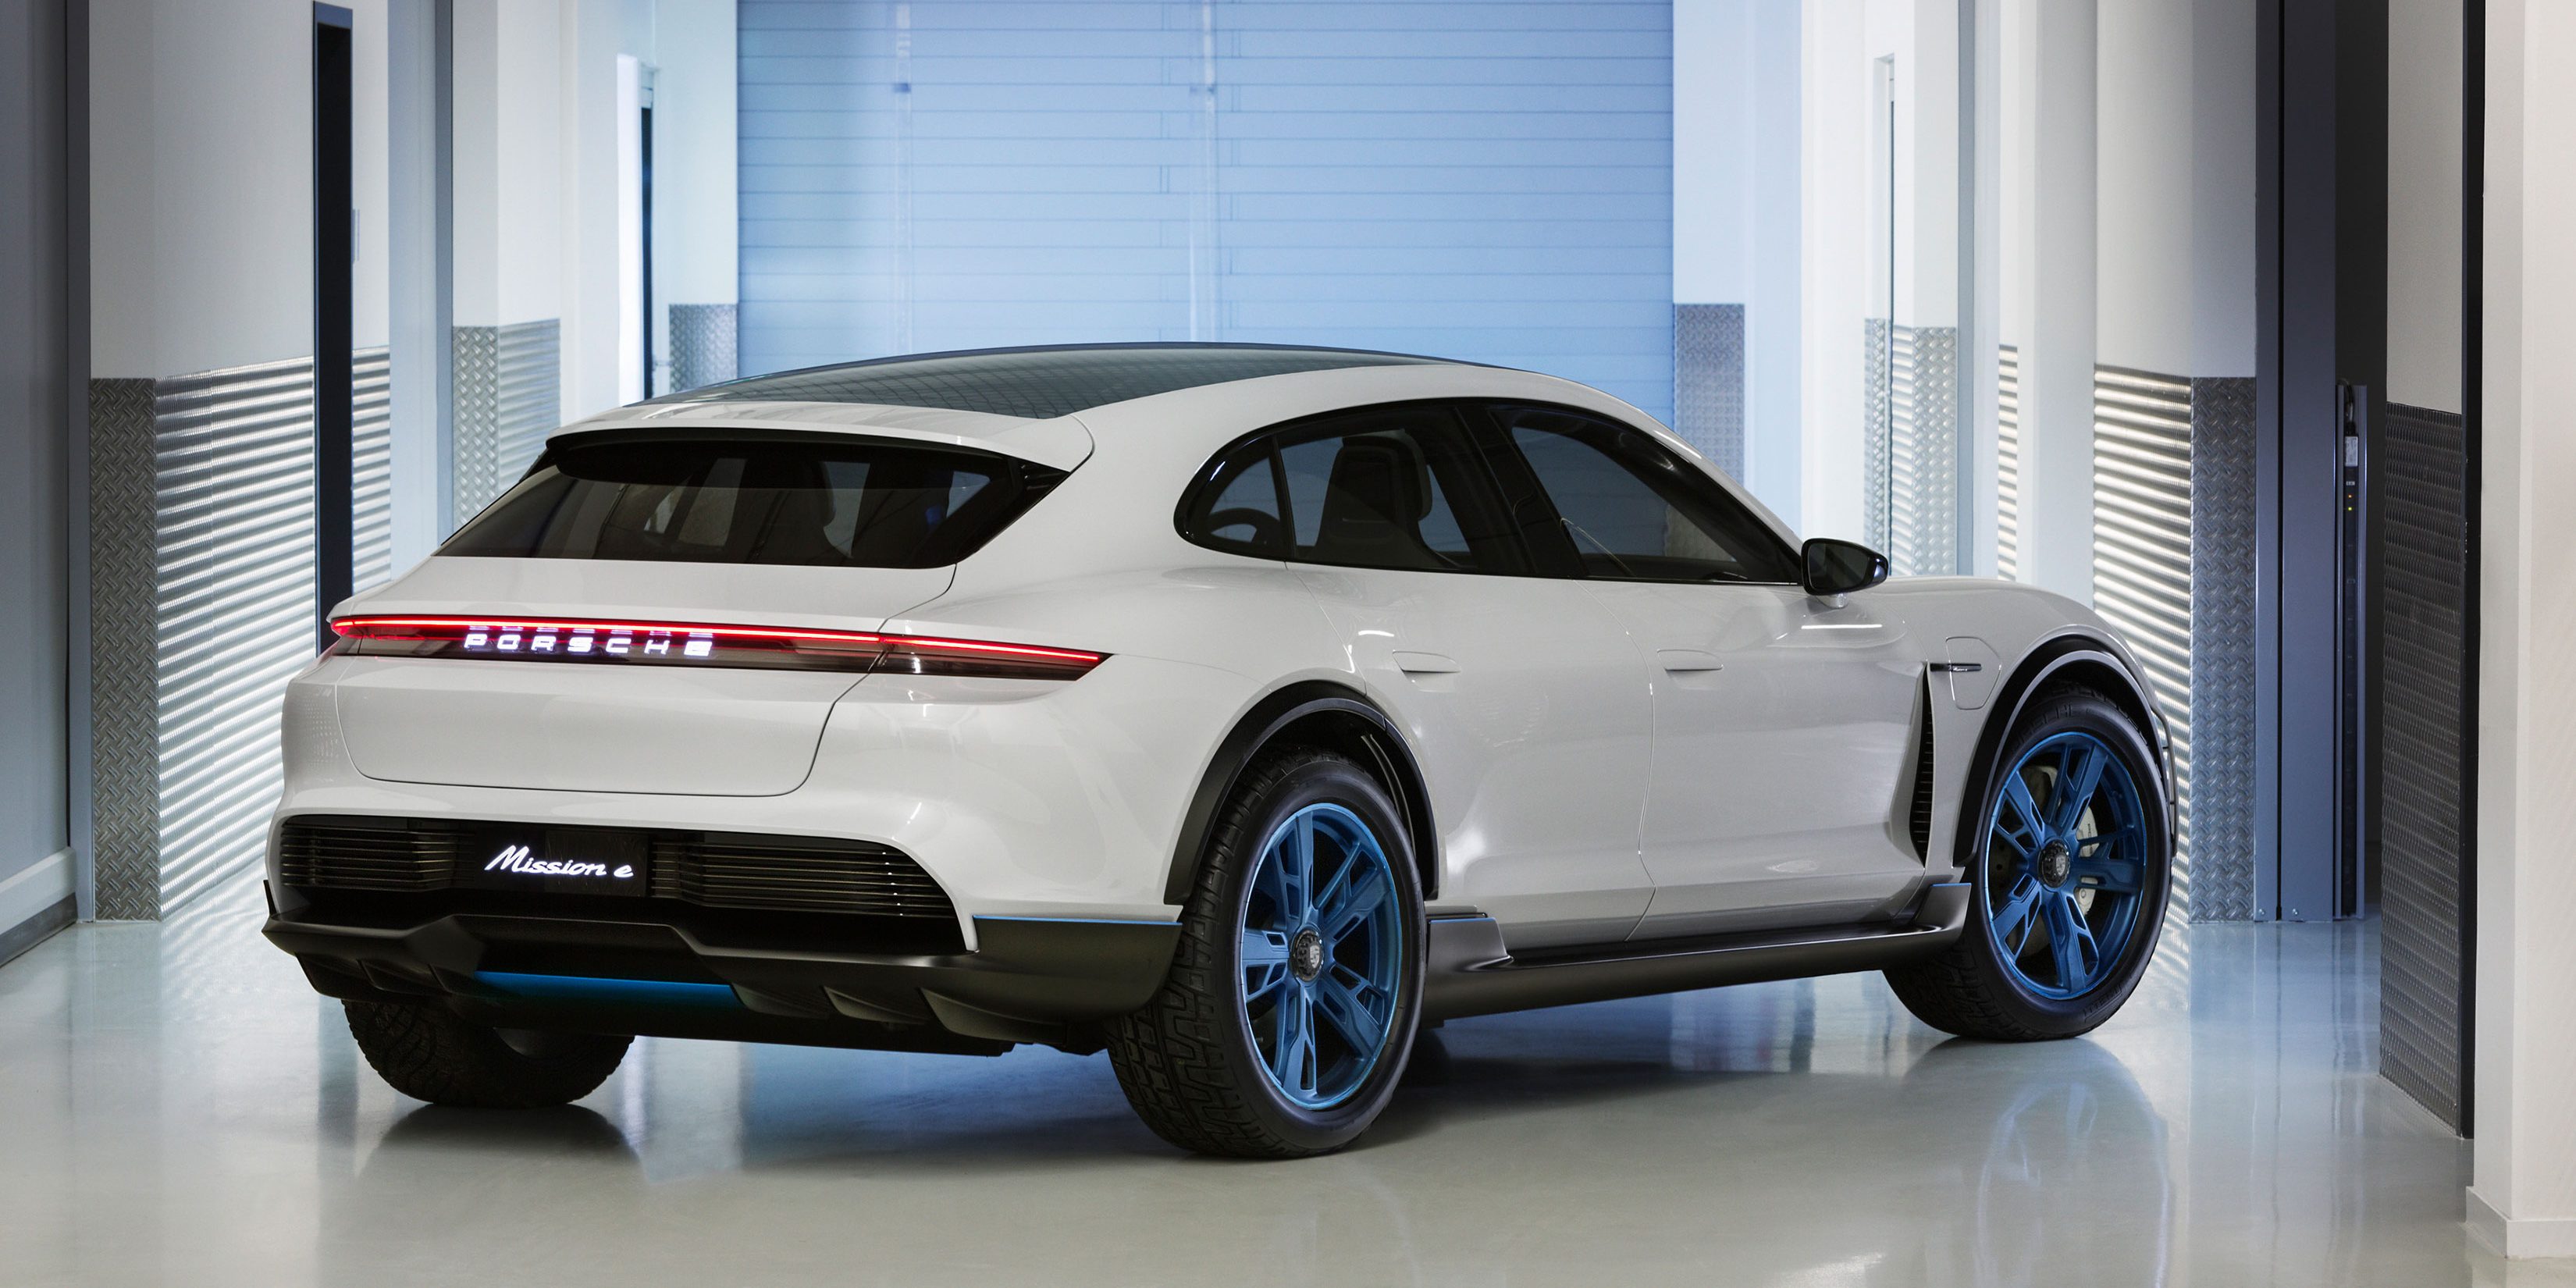 Porsche unveils new all-electric CUV version of the Mission E - Electrek